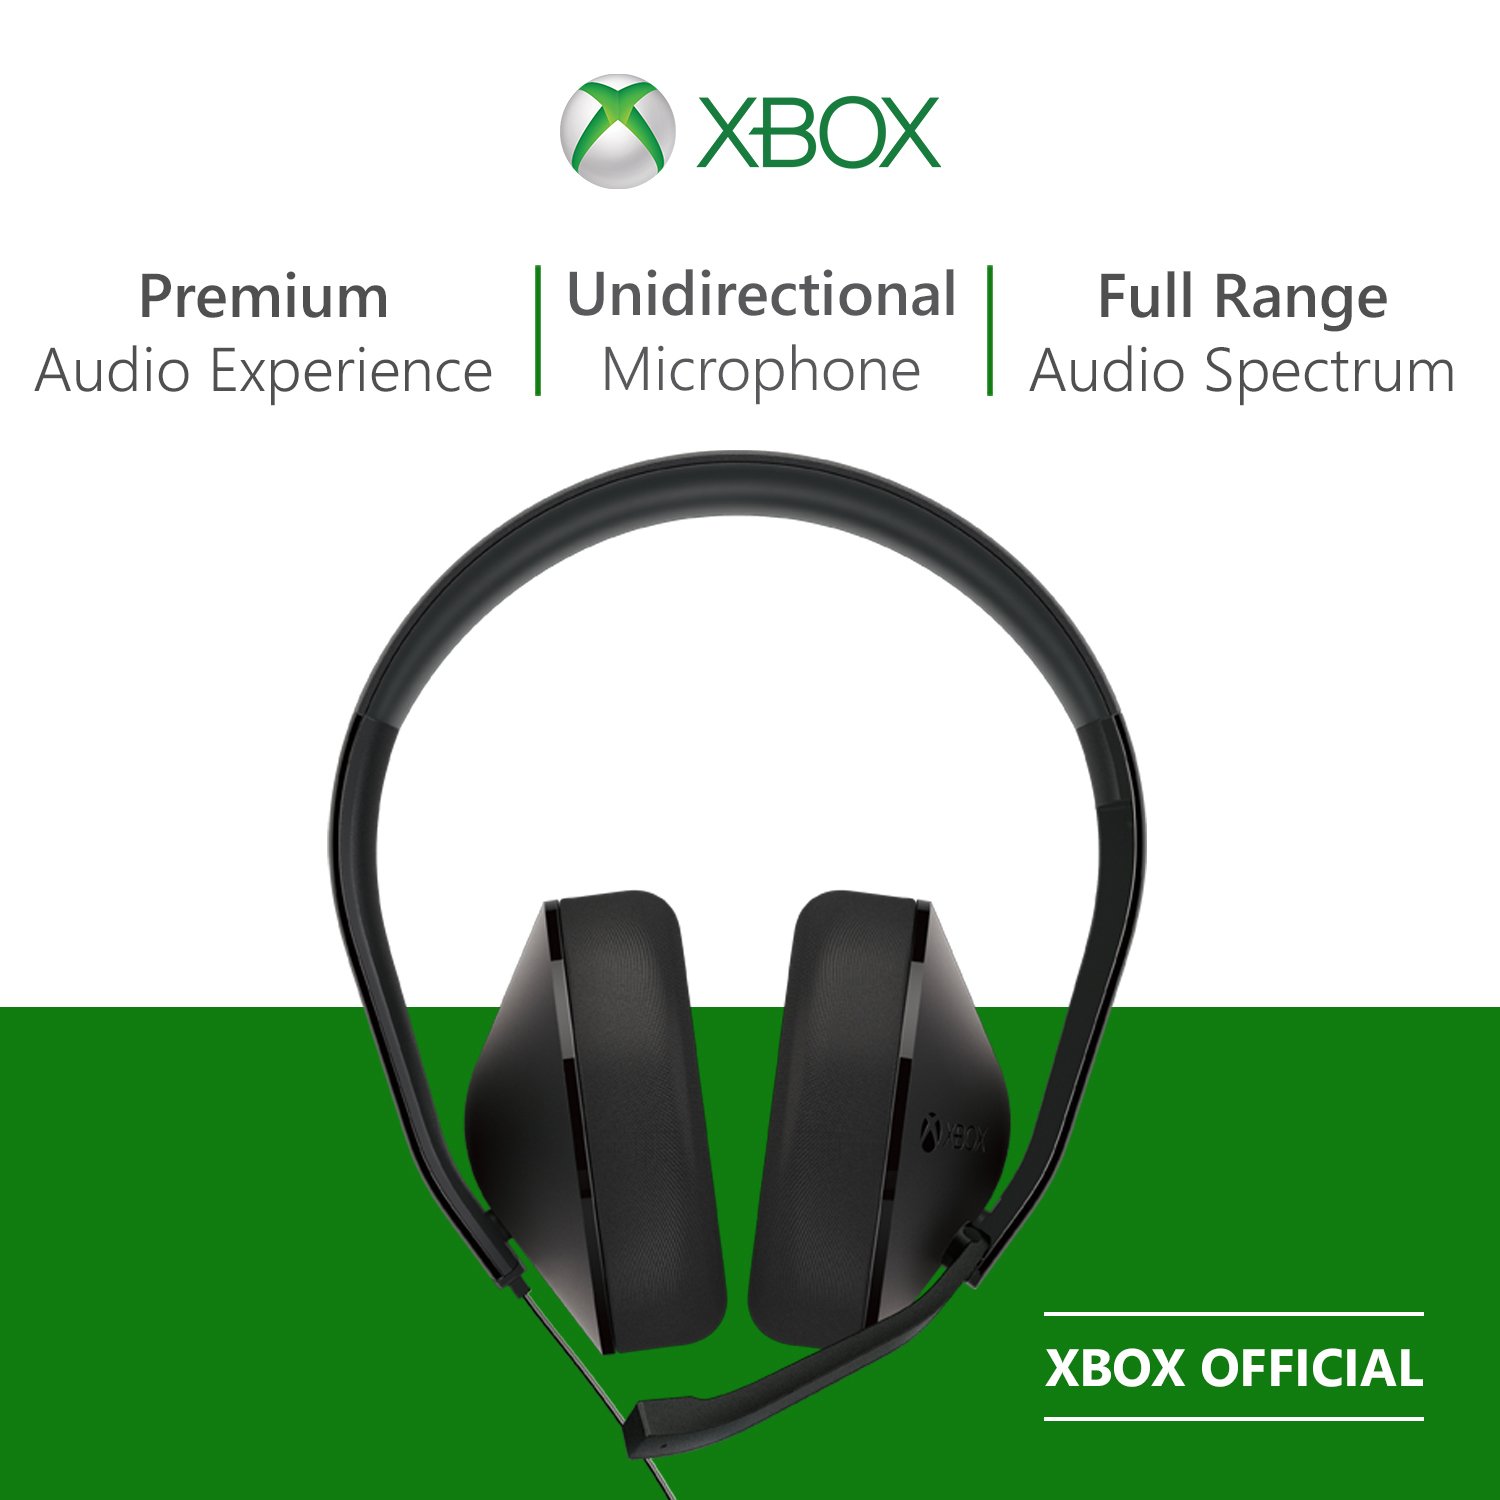 Xbox One Official Wired Stereo Headset Review